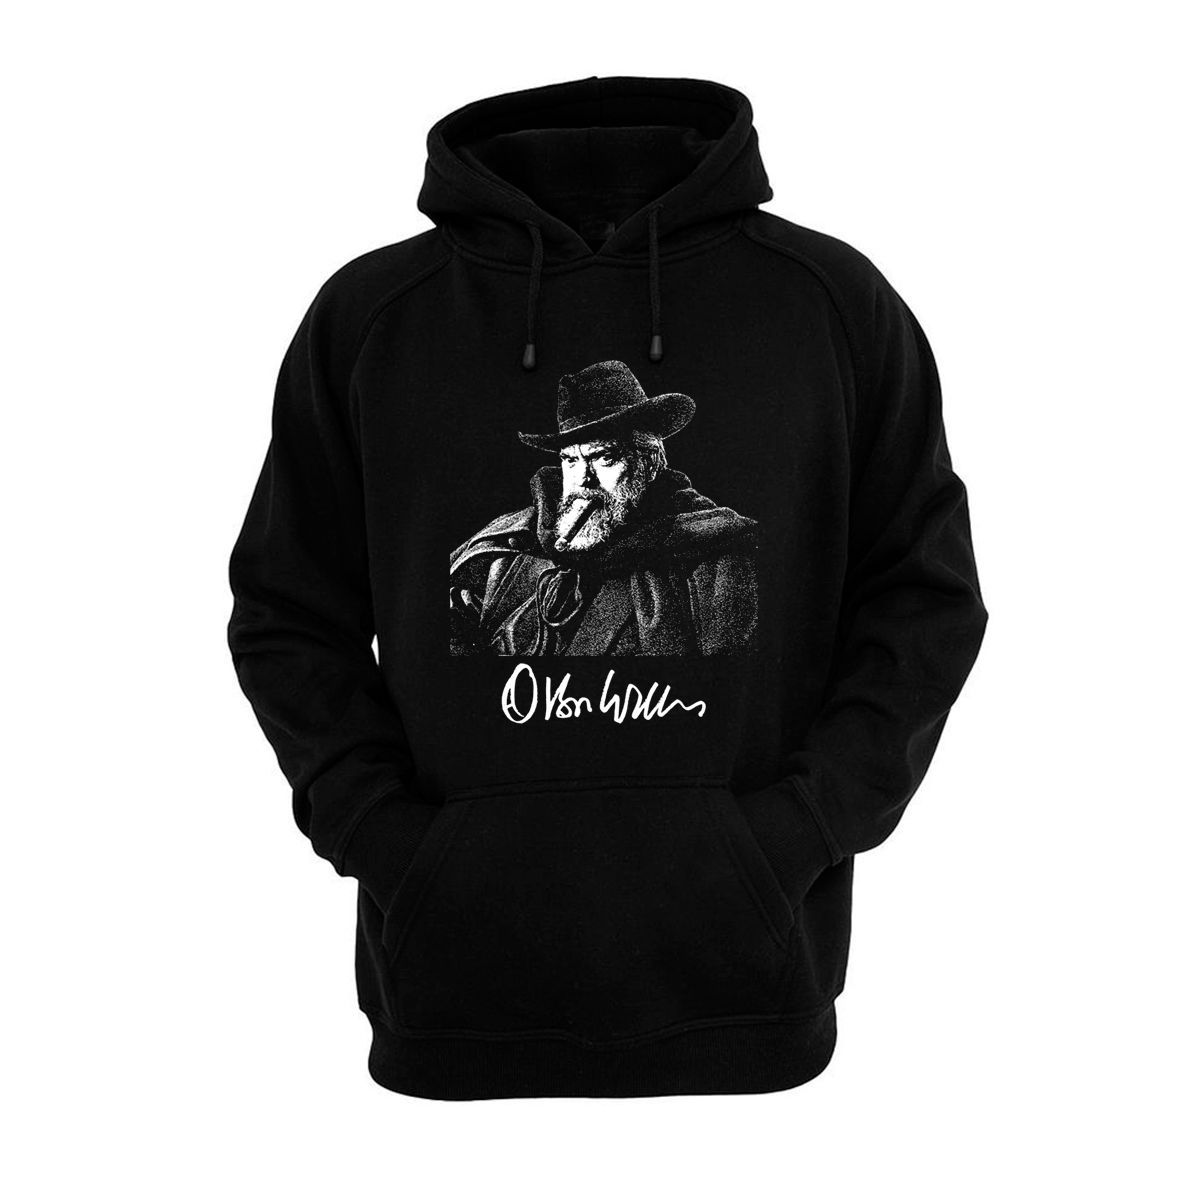 Orson Welles - Hand Screened, Pre-shrunk, Cotton blend pullover hoodie